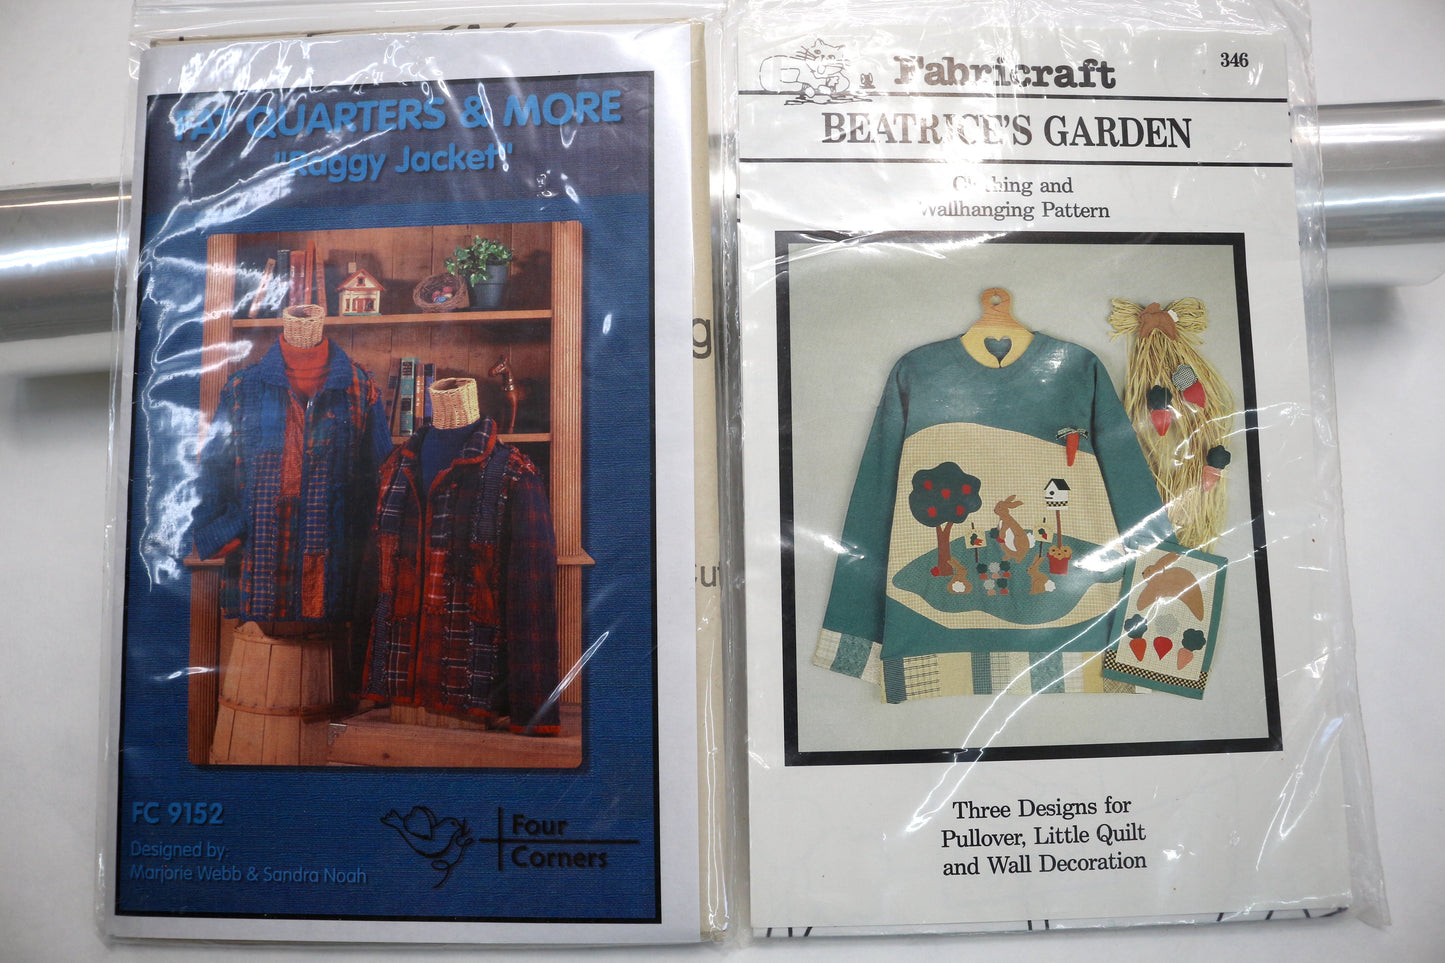 Beatrice's Garden Sewing Pattern or Fat Quarter & More Raggy Jacket